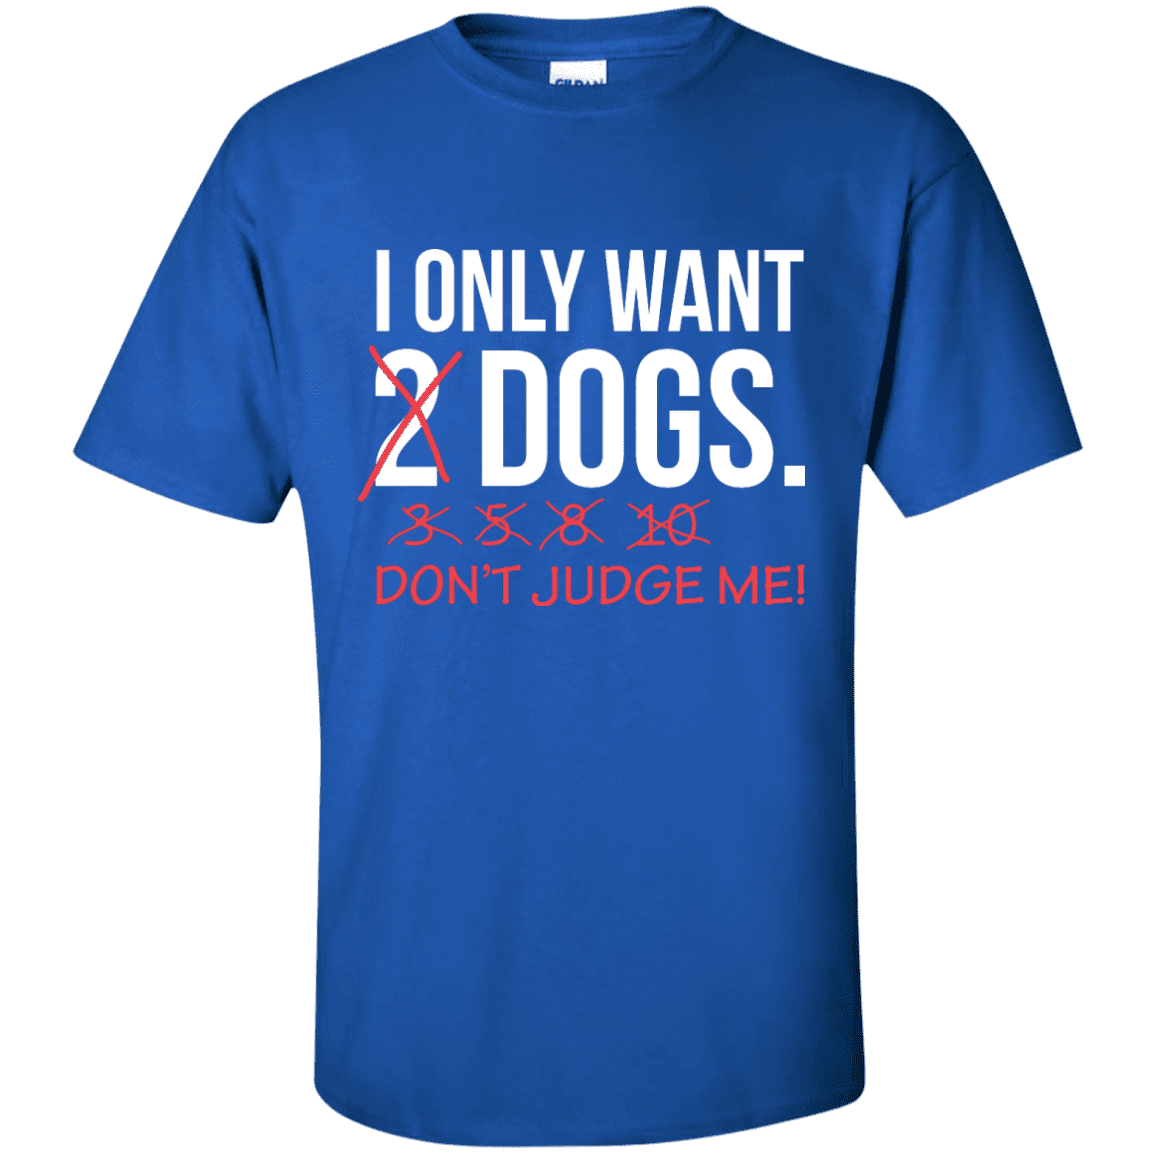 I Only Want 2 Dogs - T Shirt.